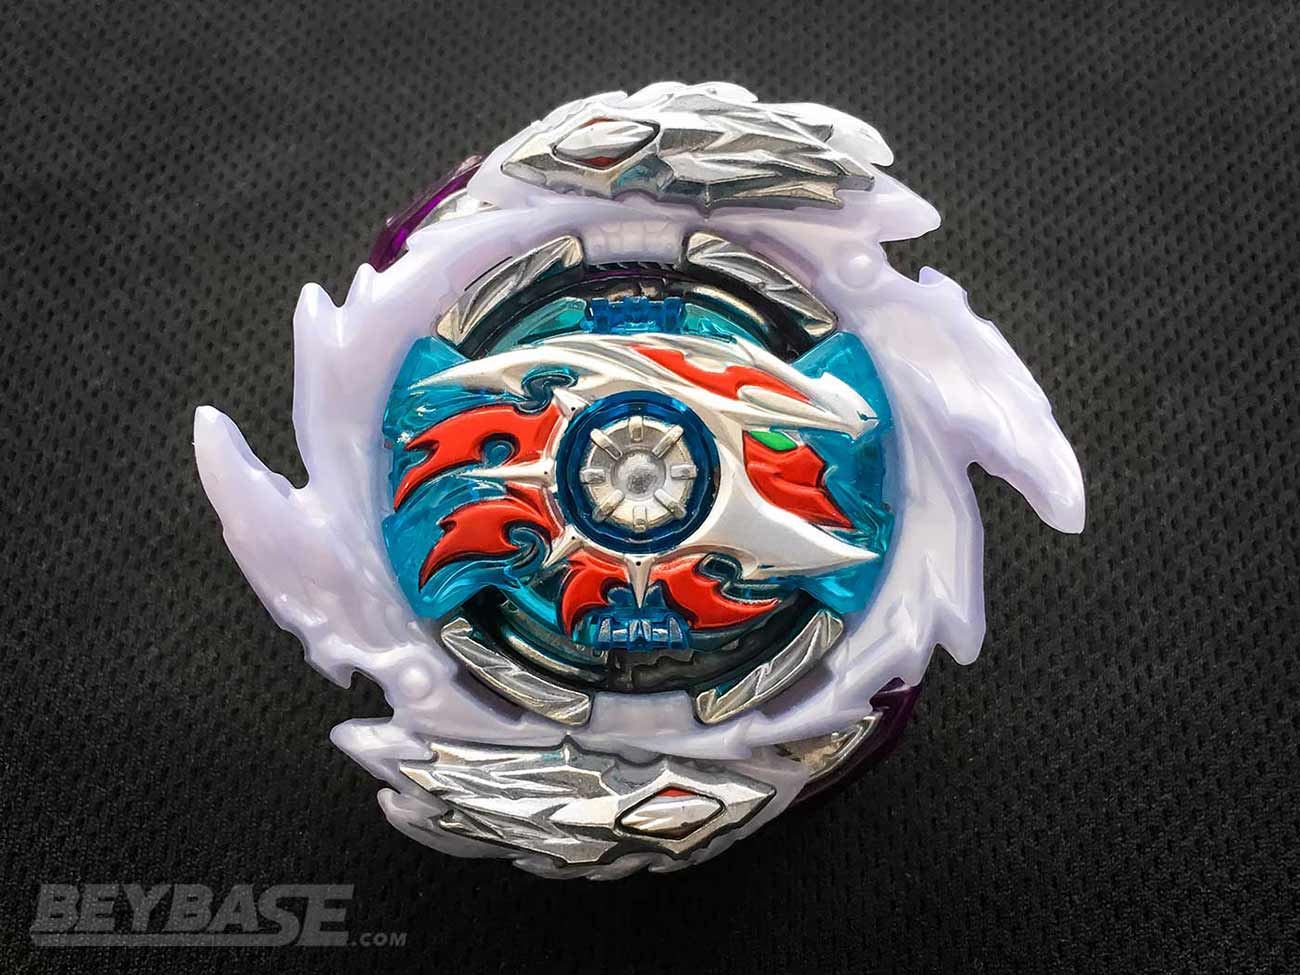 imagine gyro as a beyblader, f------ unstoppable